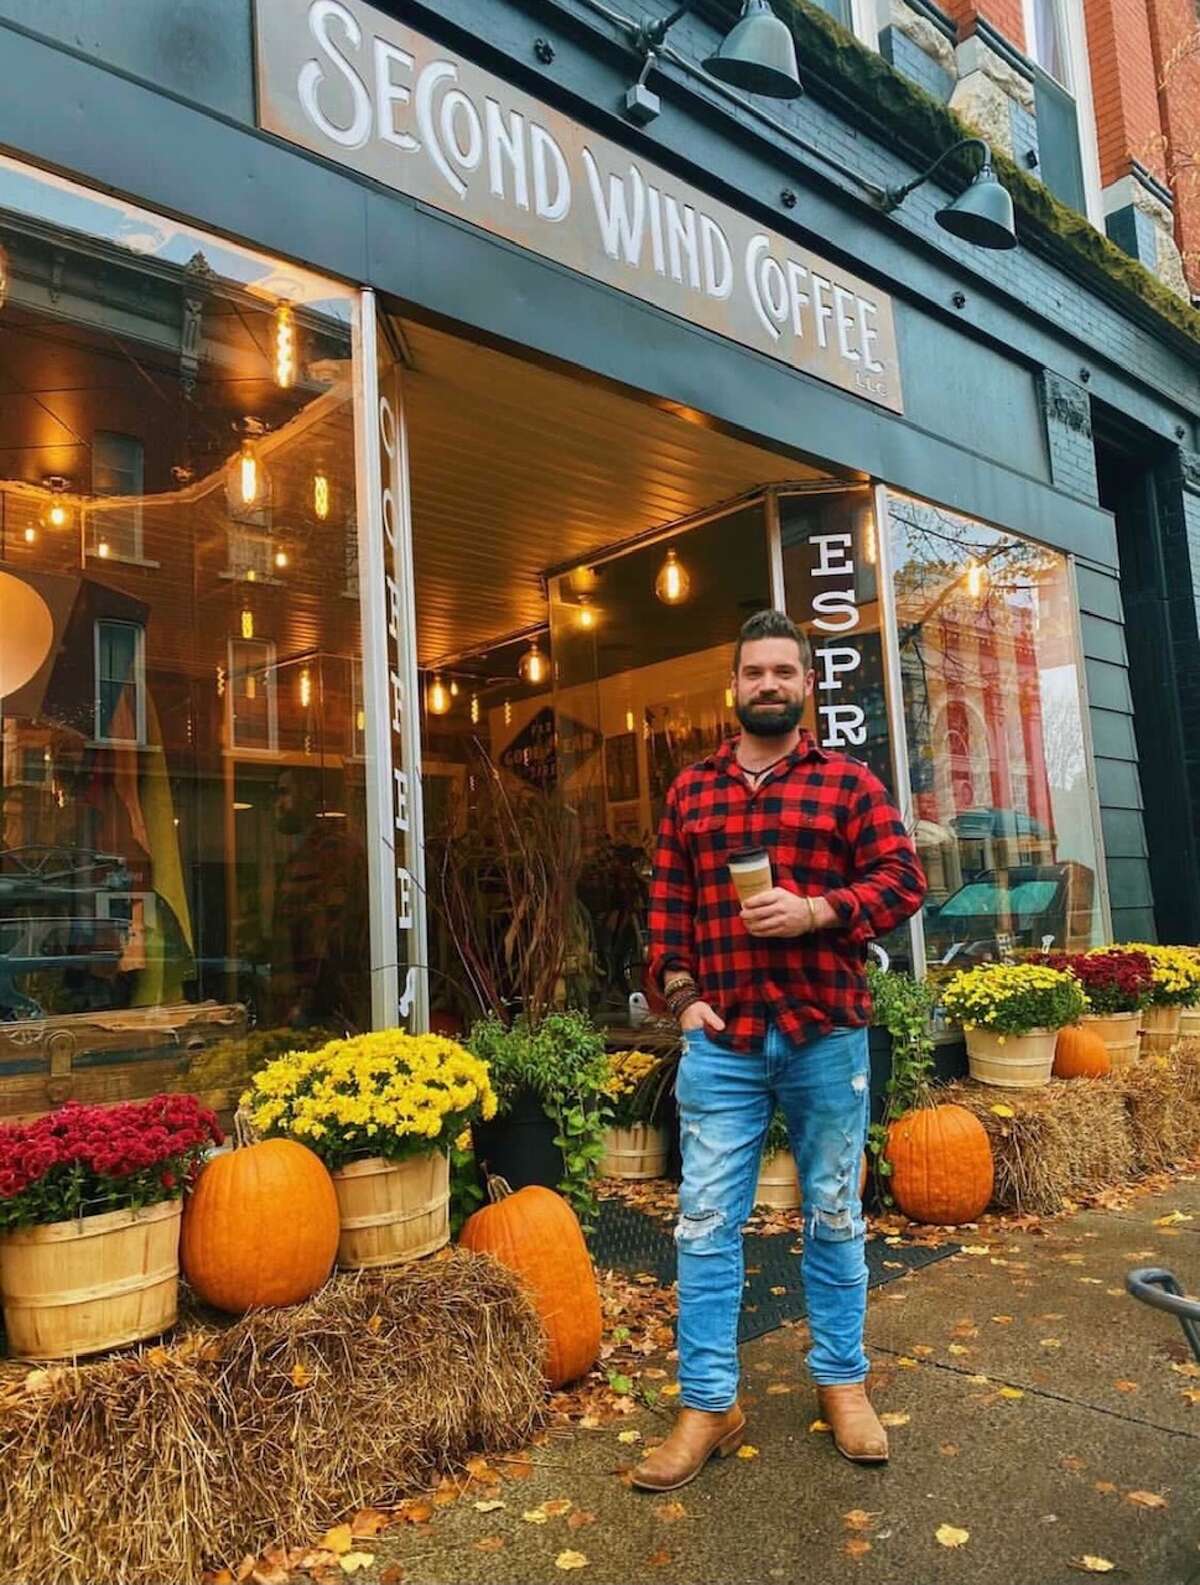 2. The name Second Wind Coffee has multiple meanings. As a cancer survivor, this is my “Second Wind” at life, a “Second Wind” for the city of Johnstown and caffeine gives you your “Second Wind."